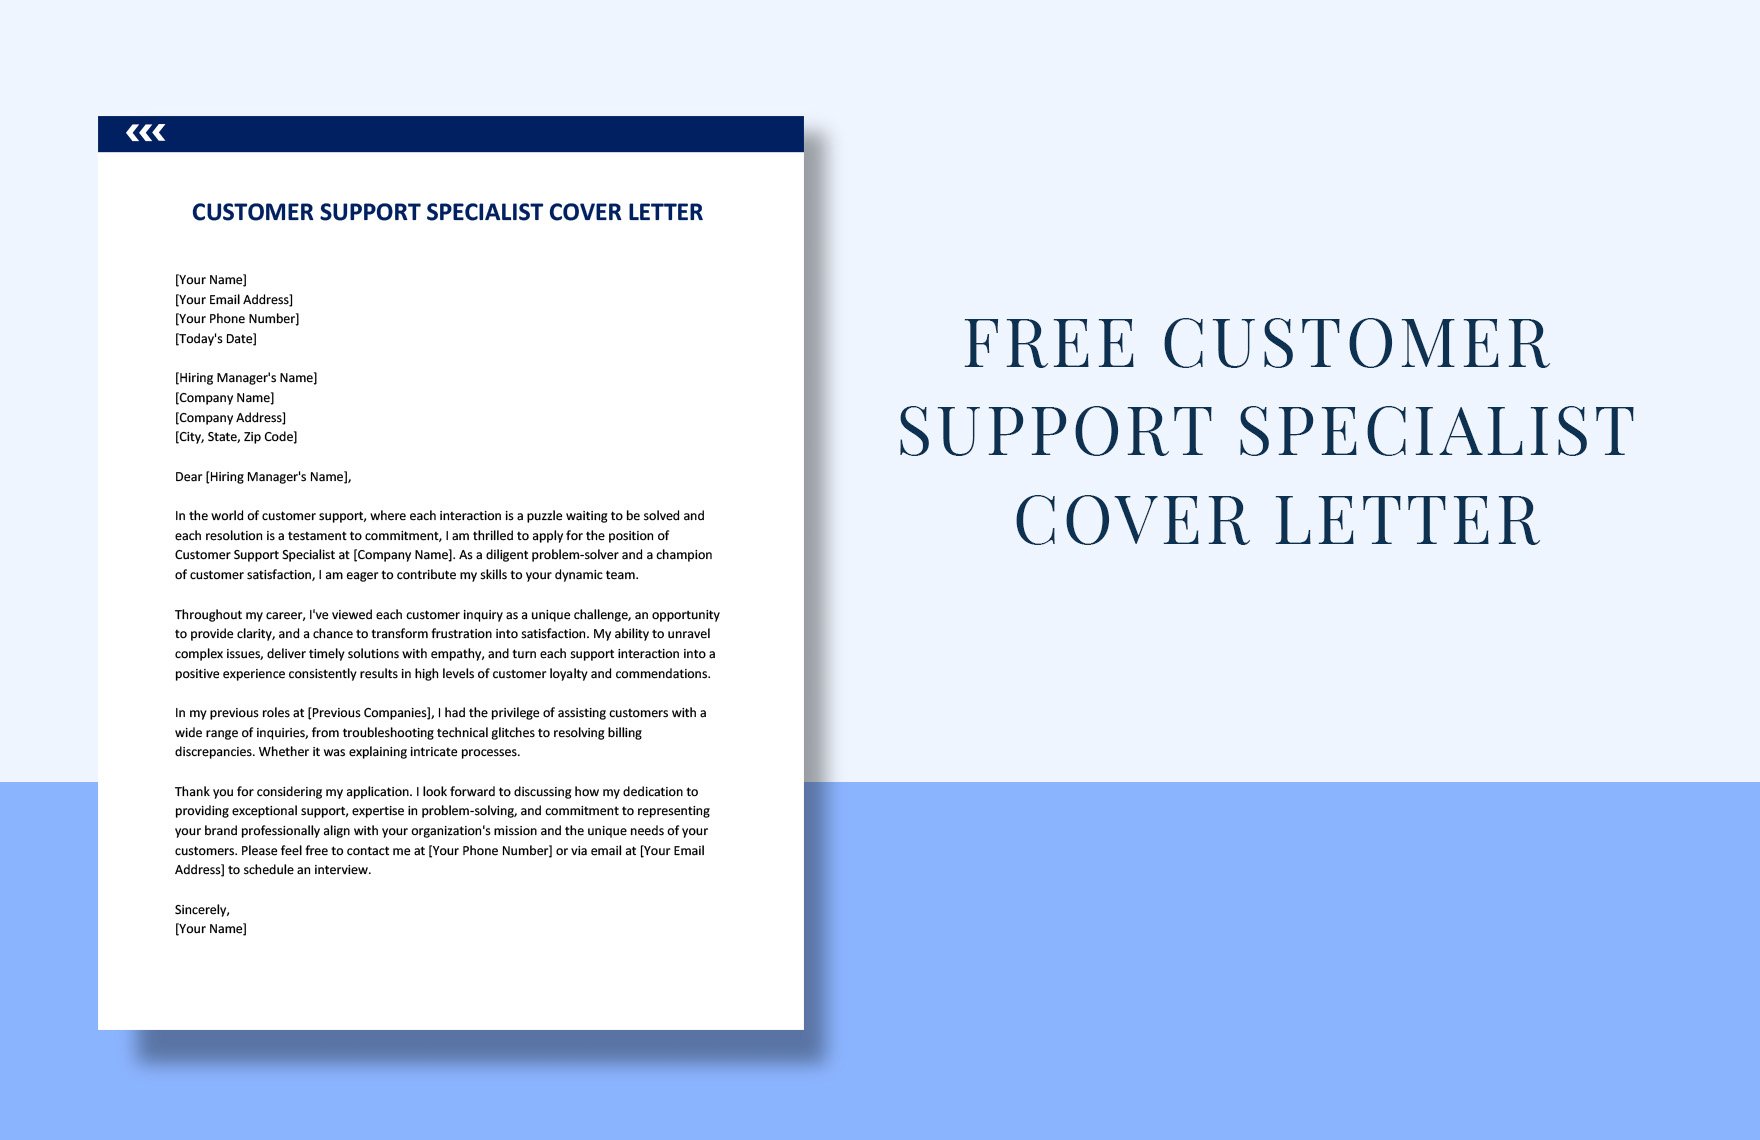 Customer Support Specialist Cover Letter in Word, Google Docs ...